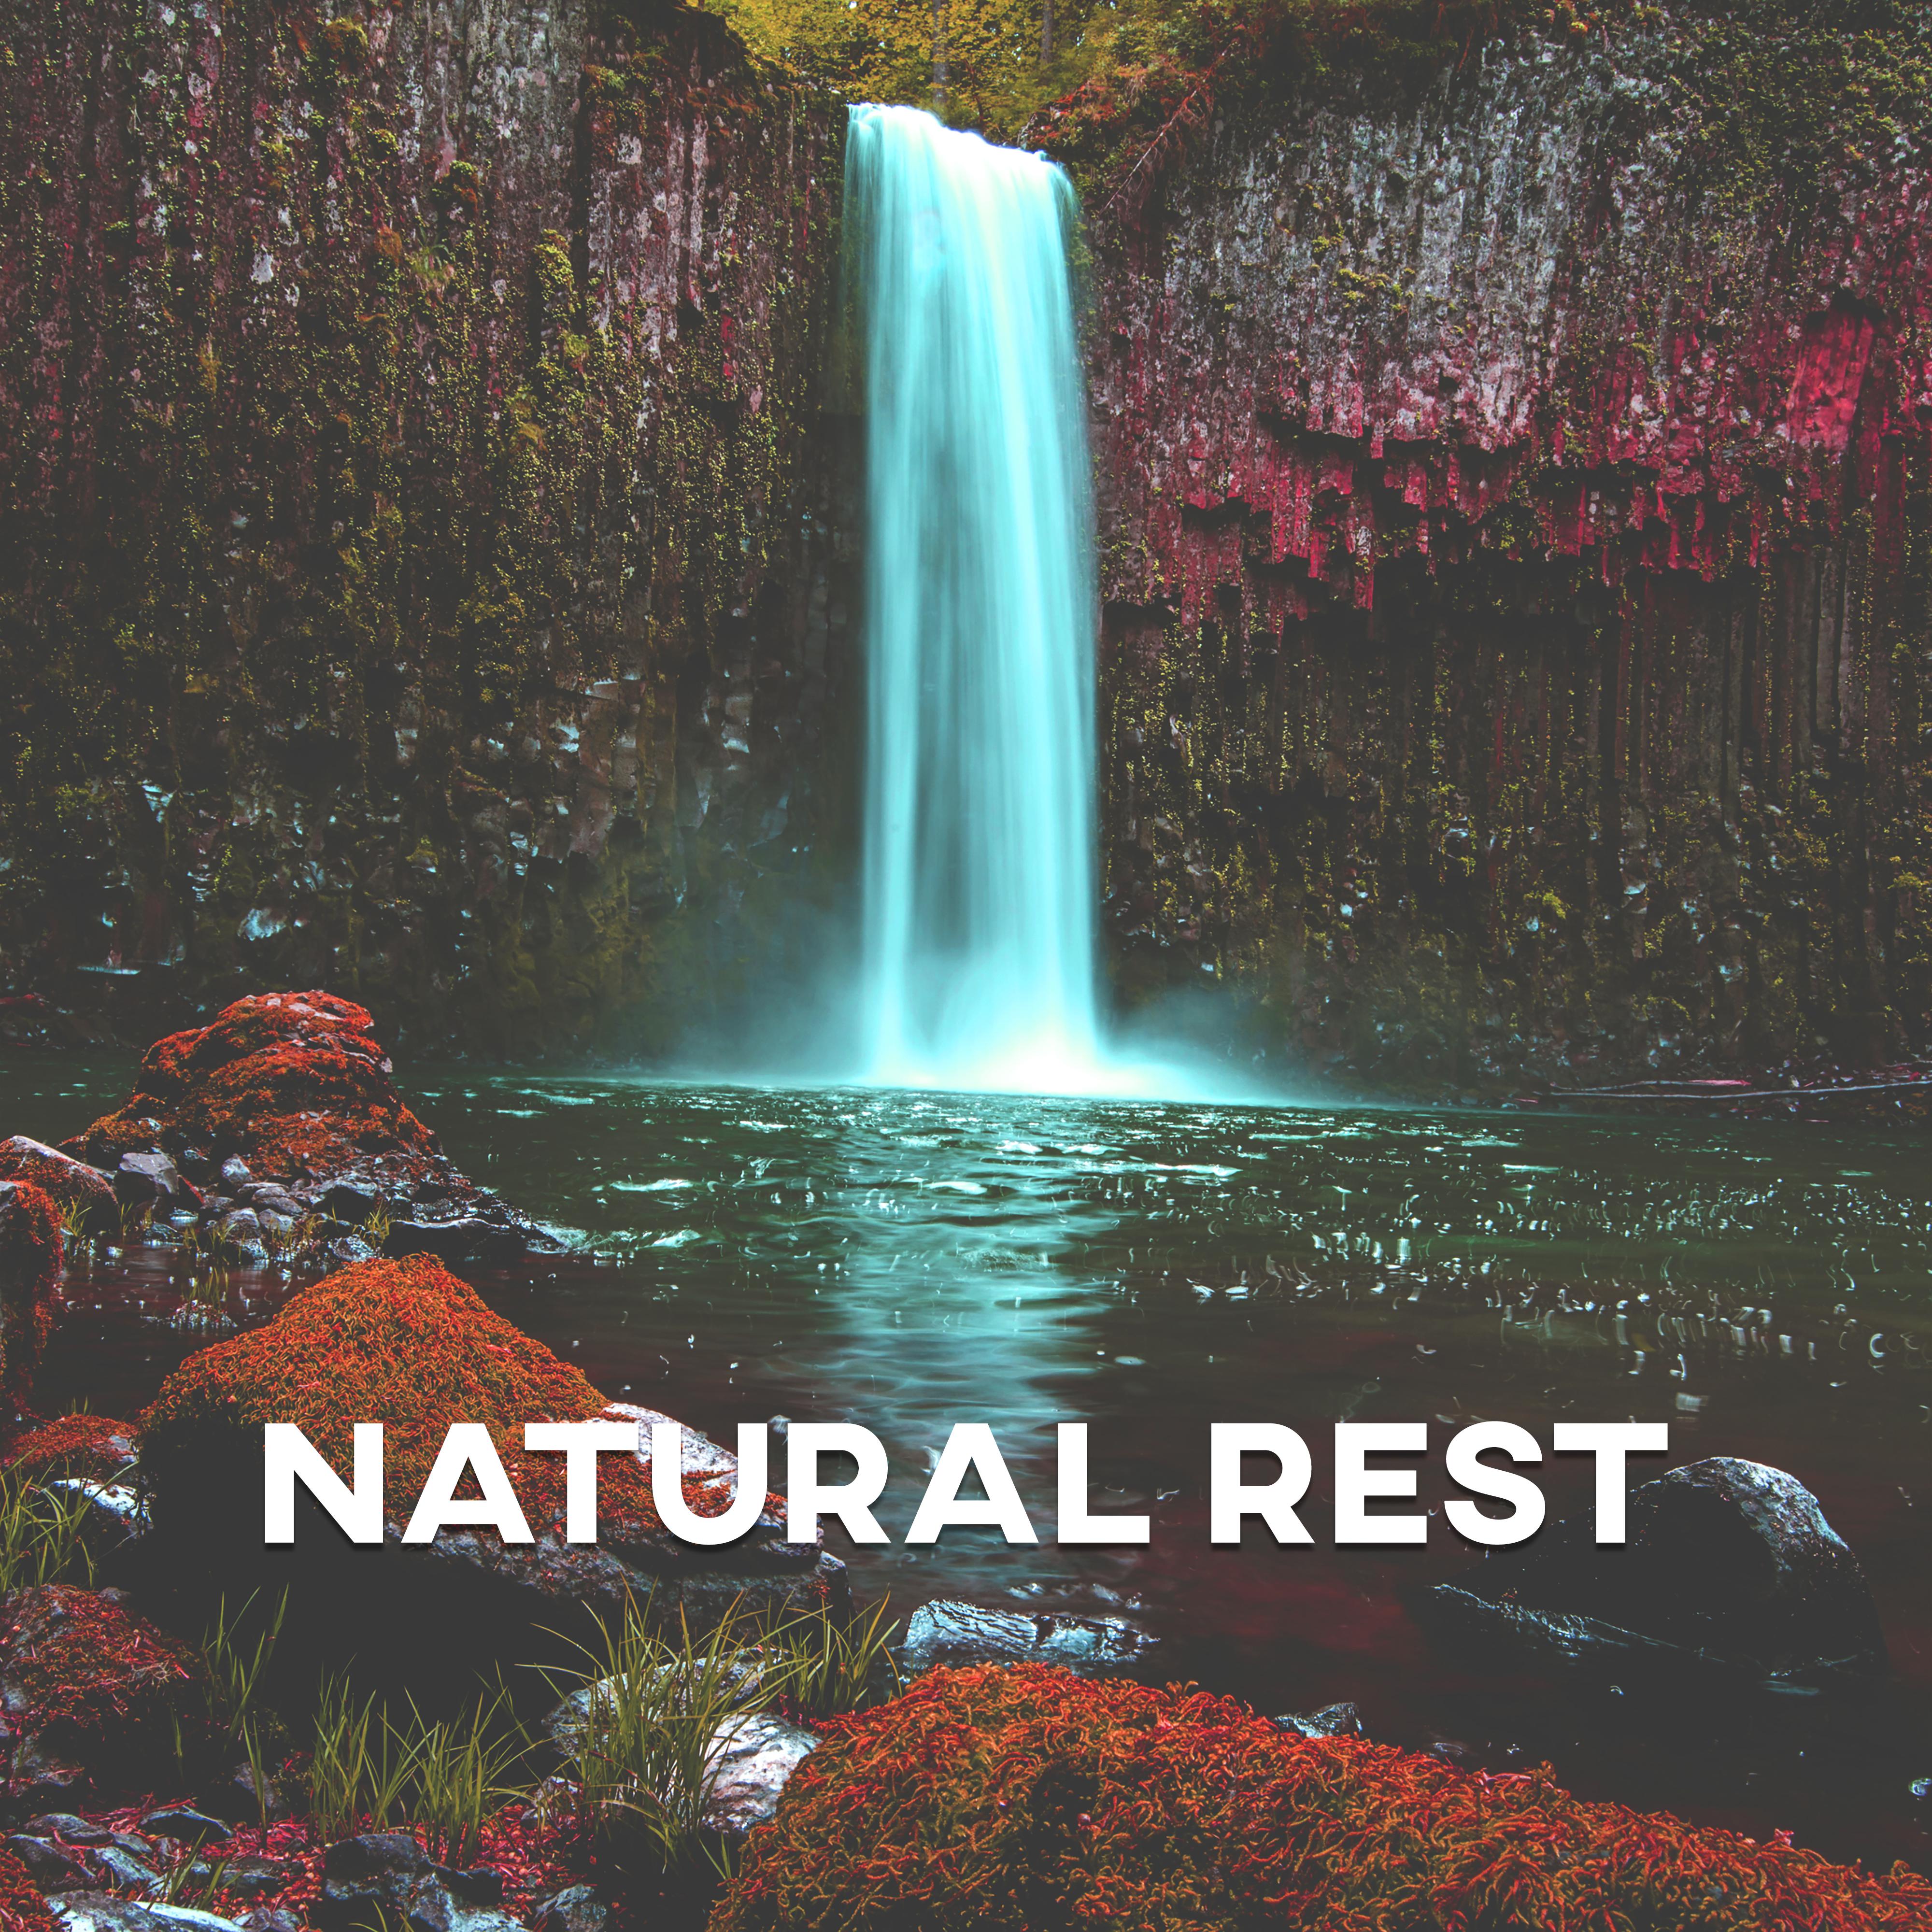 Natural Rest - Babbling Brook, Sounds Water, Relaxation of the Body and Mind, Rest by Snooze, Near Nature, Little Sleep, Good Nap, Sweet Dreams